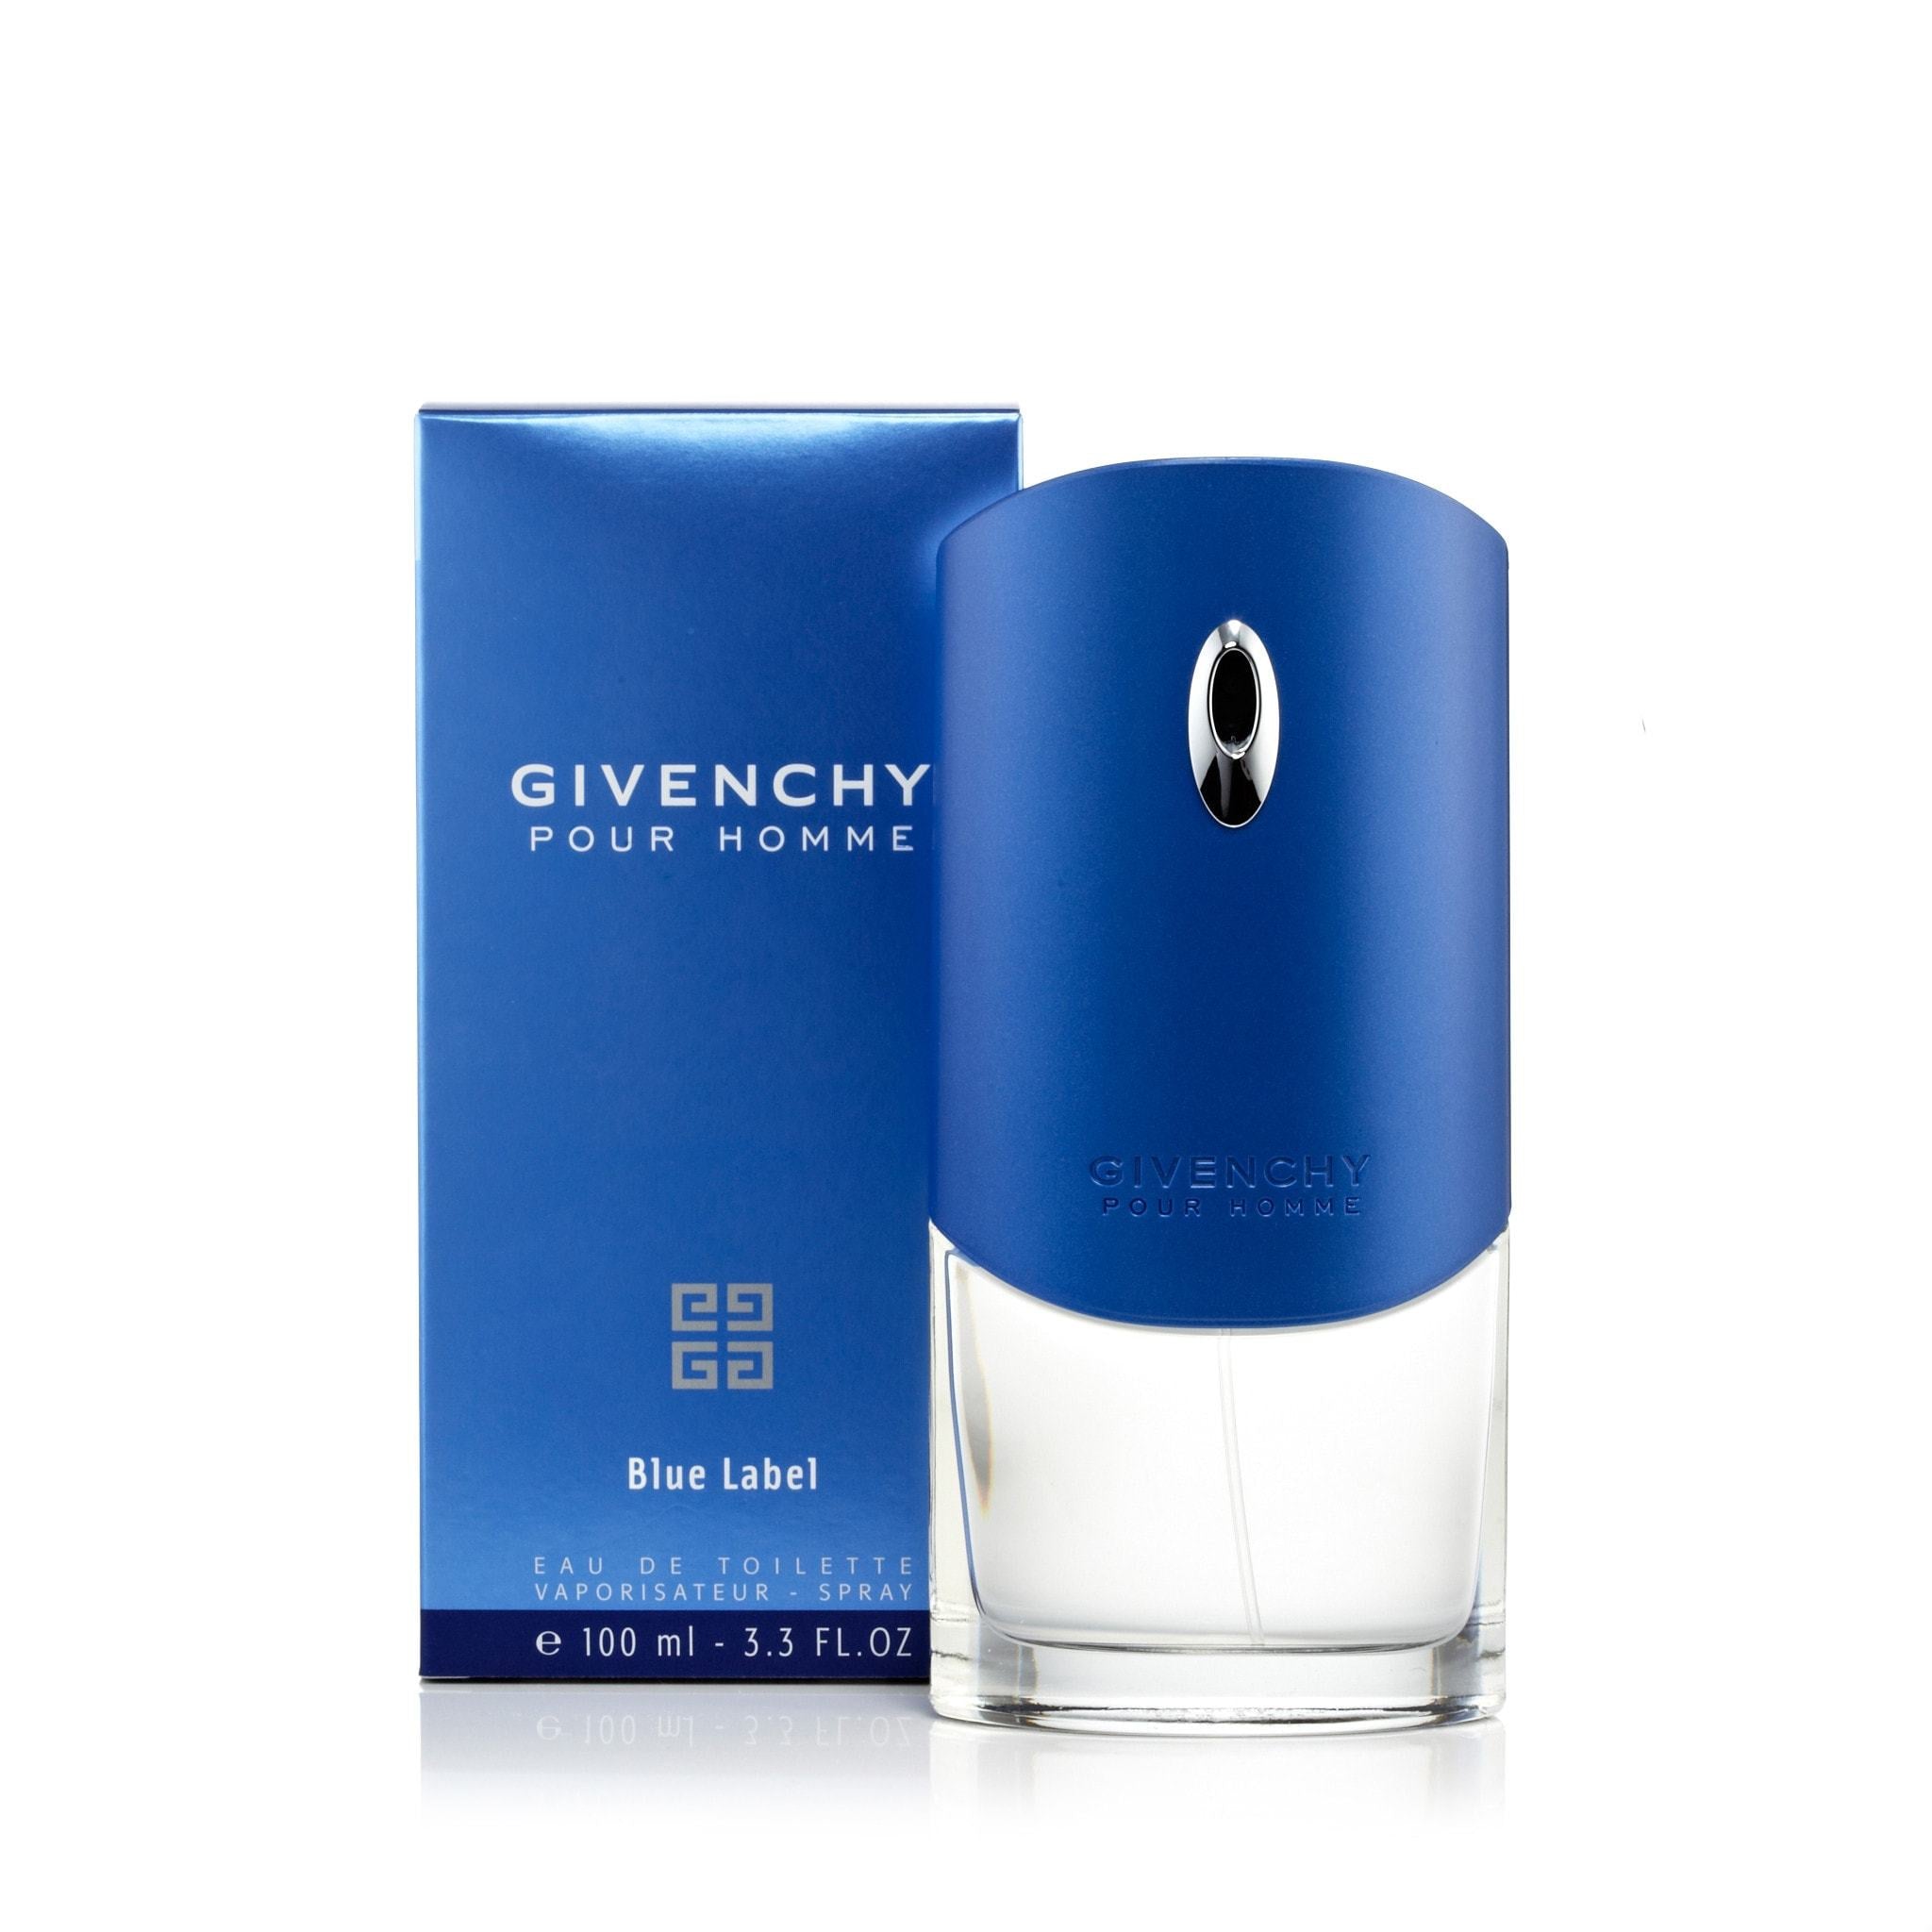 Givenchy pour homme 100. Givenchy pour homme Blue Label 100ml. Givenchy Blue Label for men EDT 100ml. Givenchy pour 100 ml. Givenchy pour homme Blue Label m.